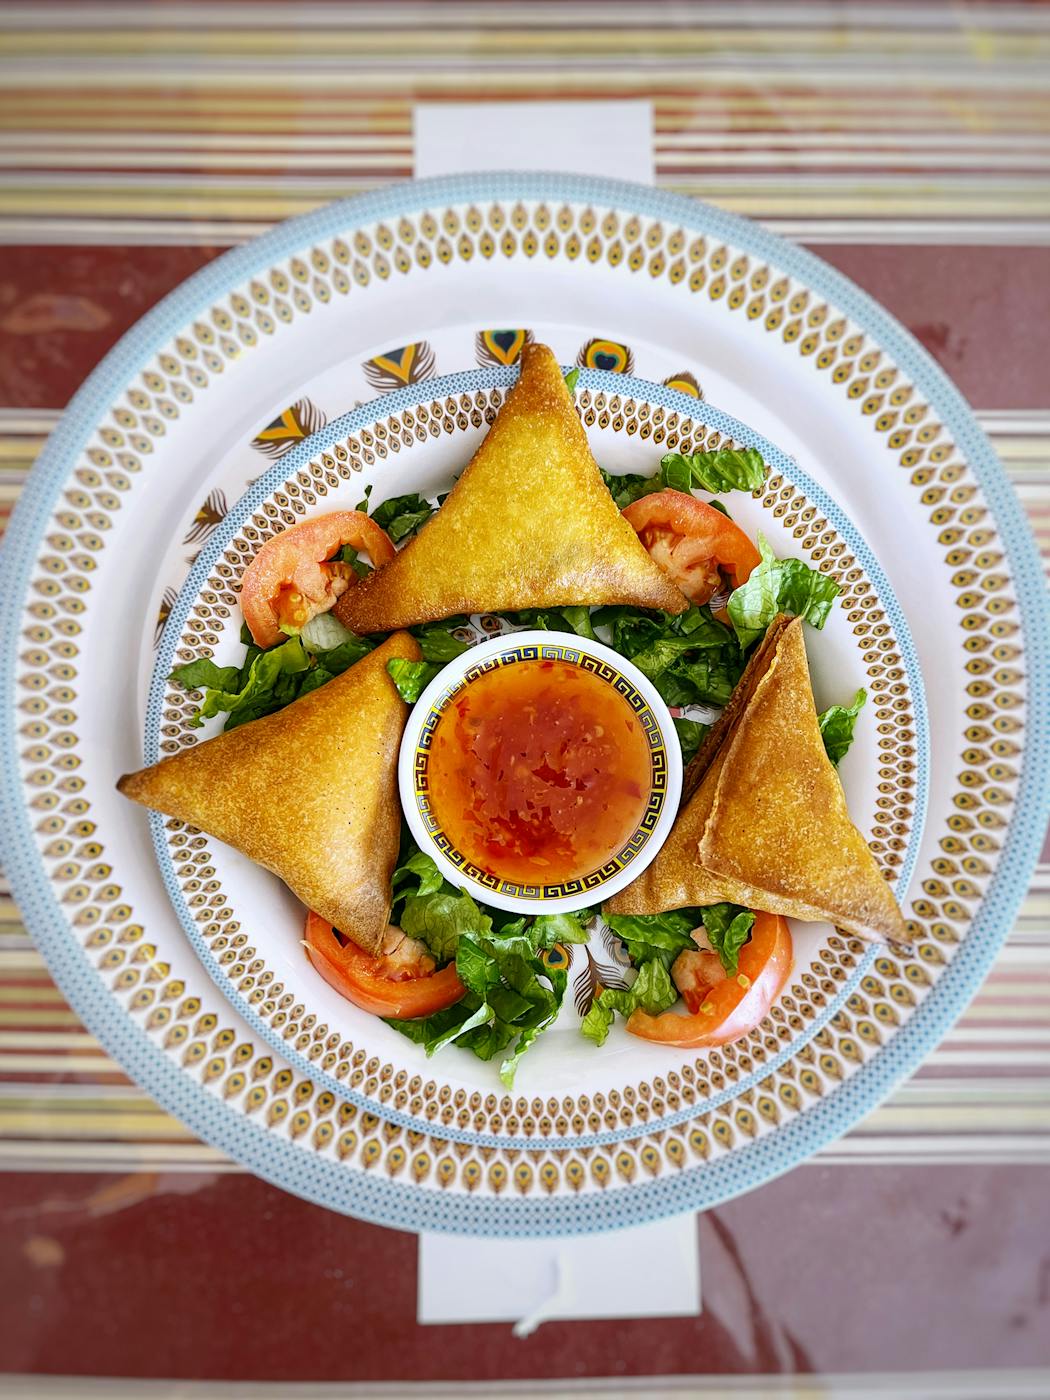 Selam’s sambusas are as attention-grabbing as its traditional platters.